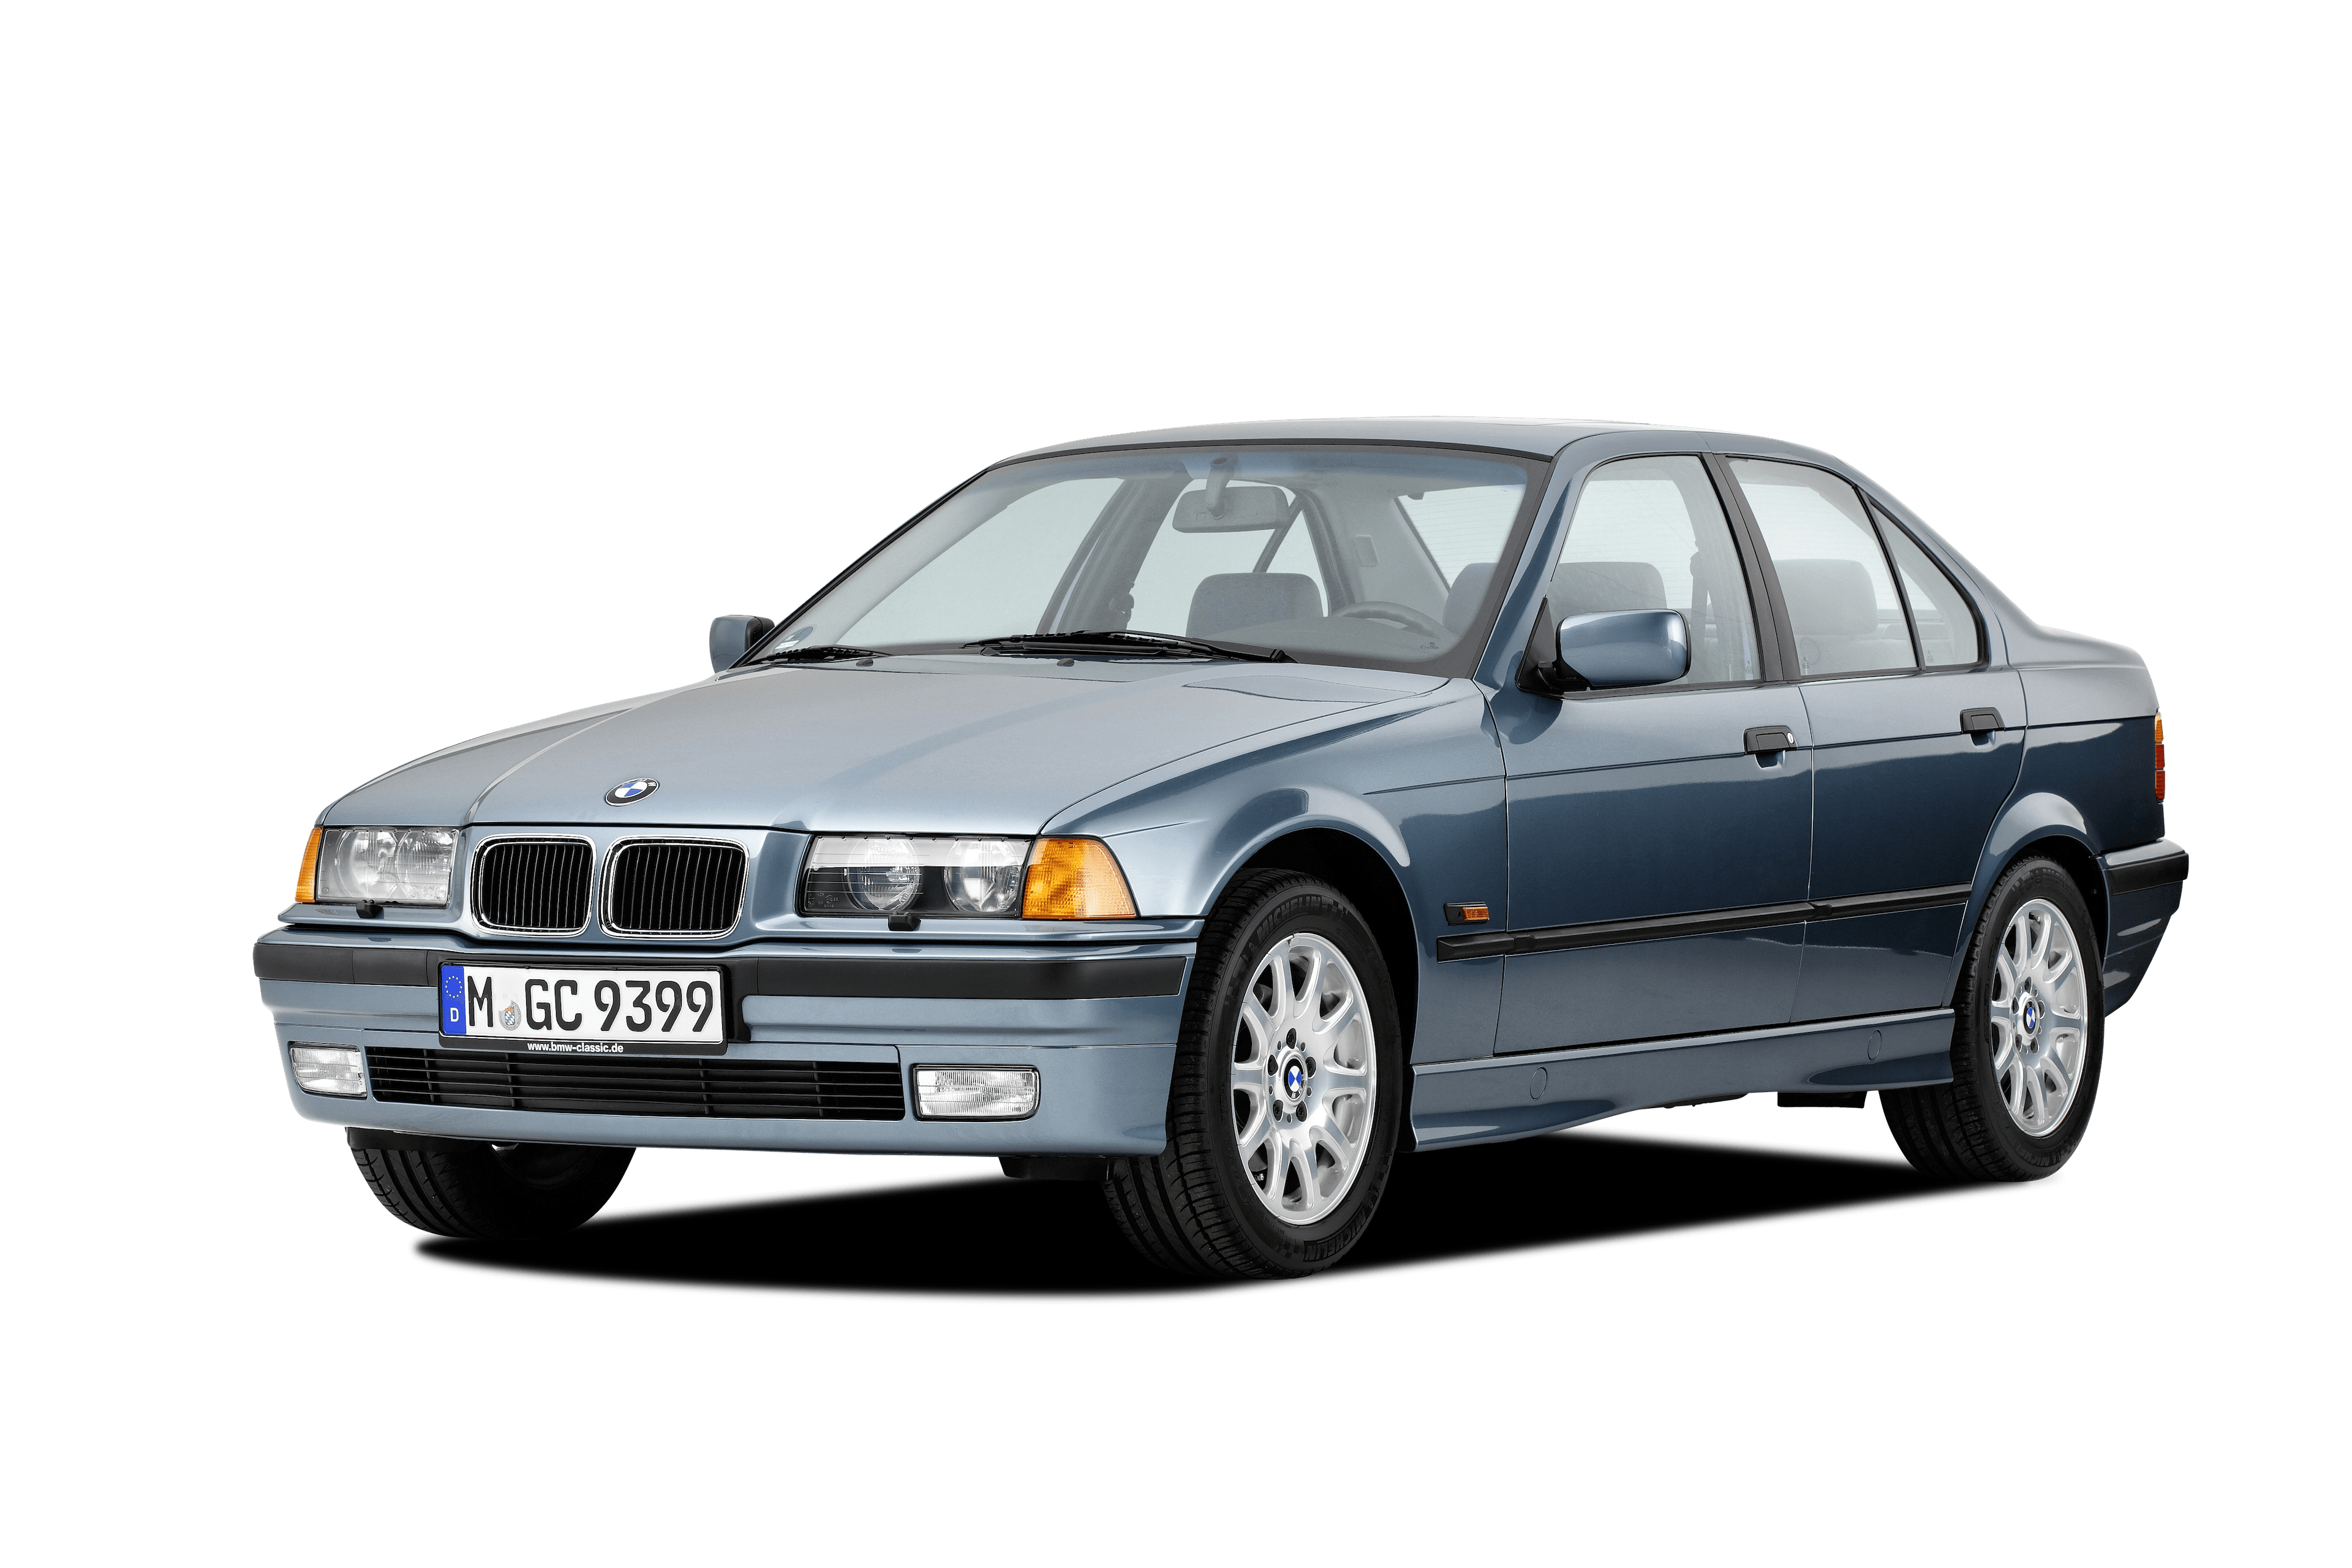 BMW 316i Review, For Sale, Specs, Models & News in Australia